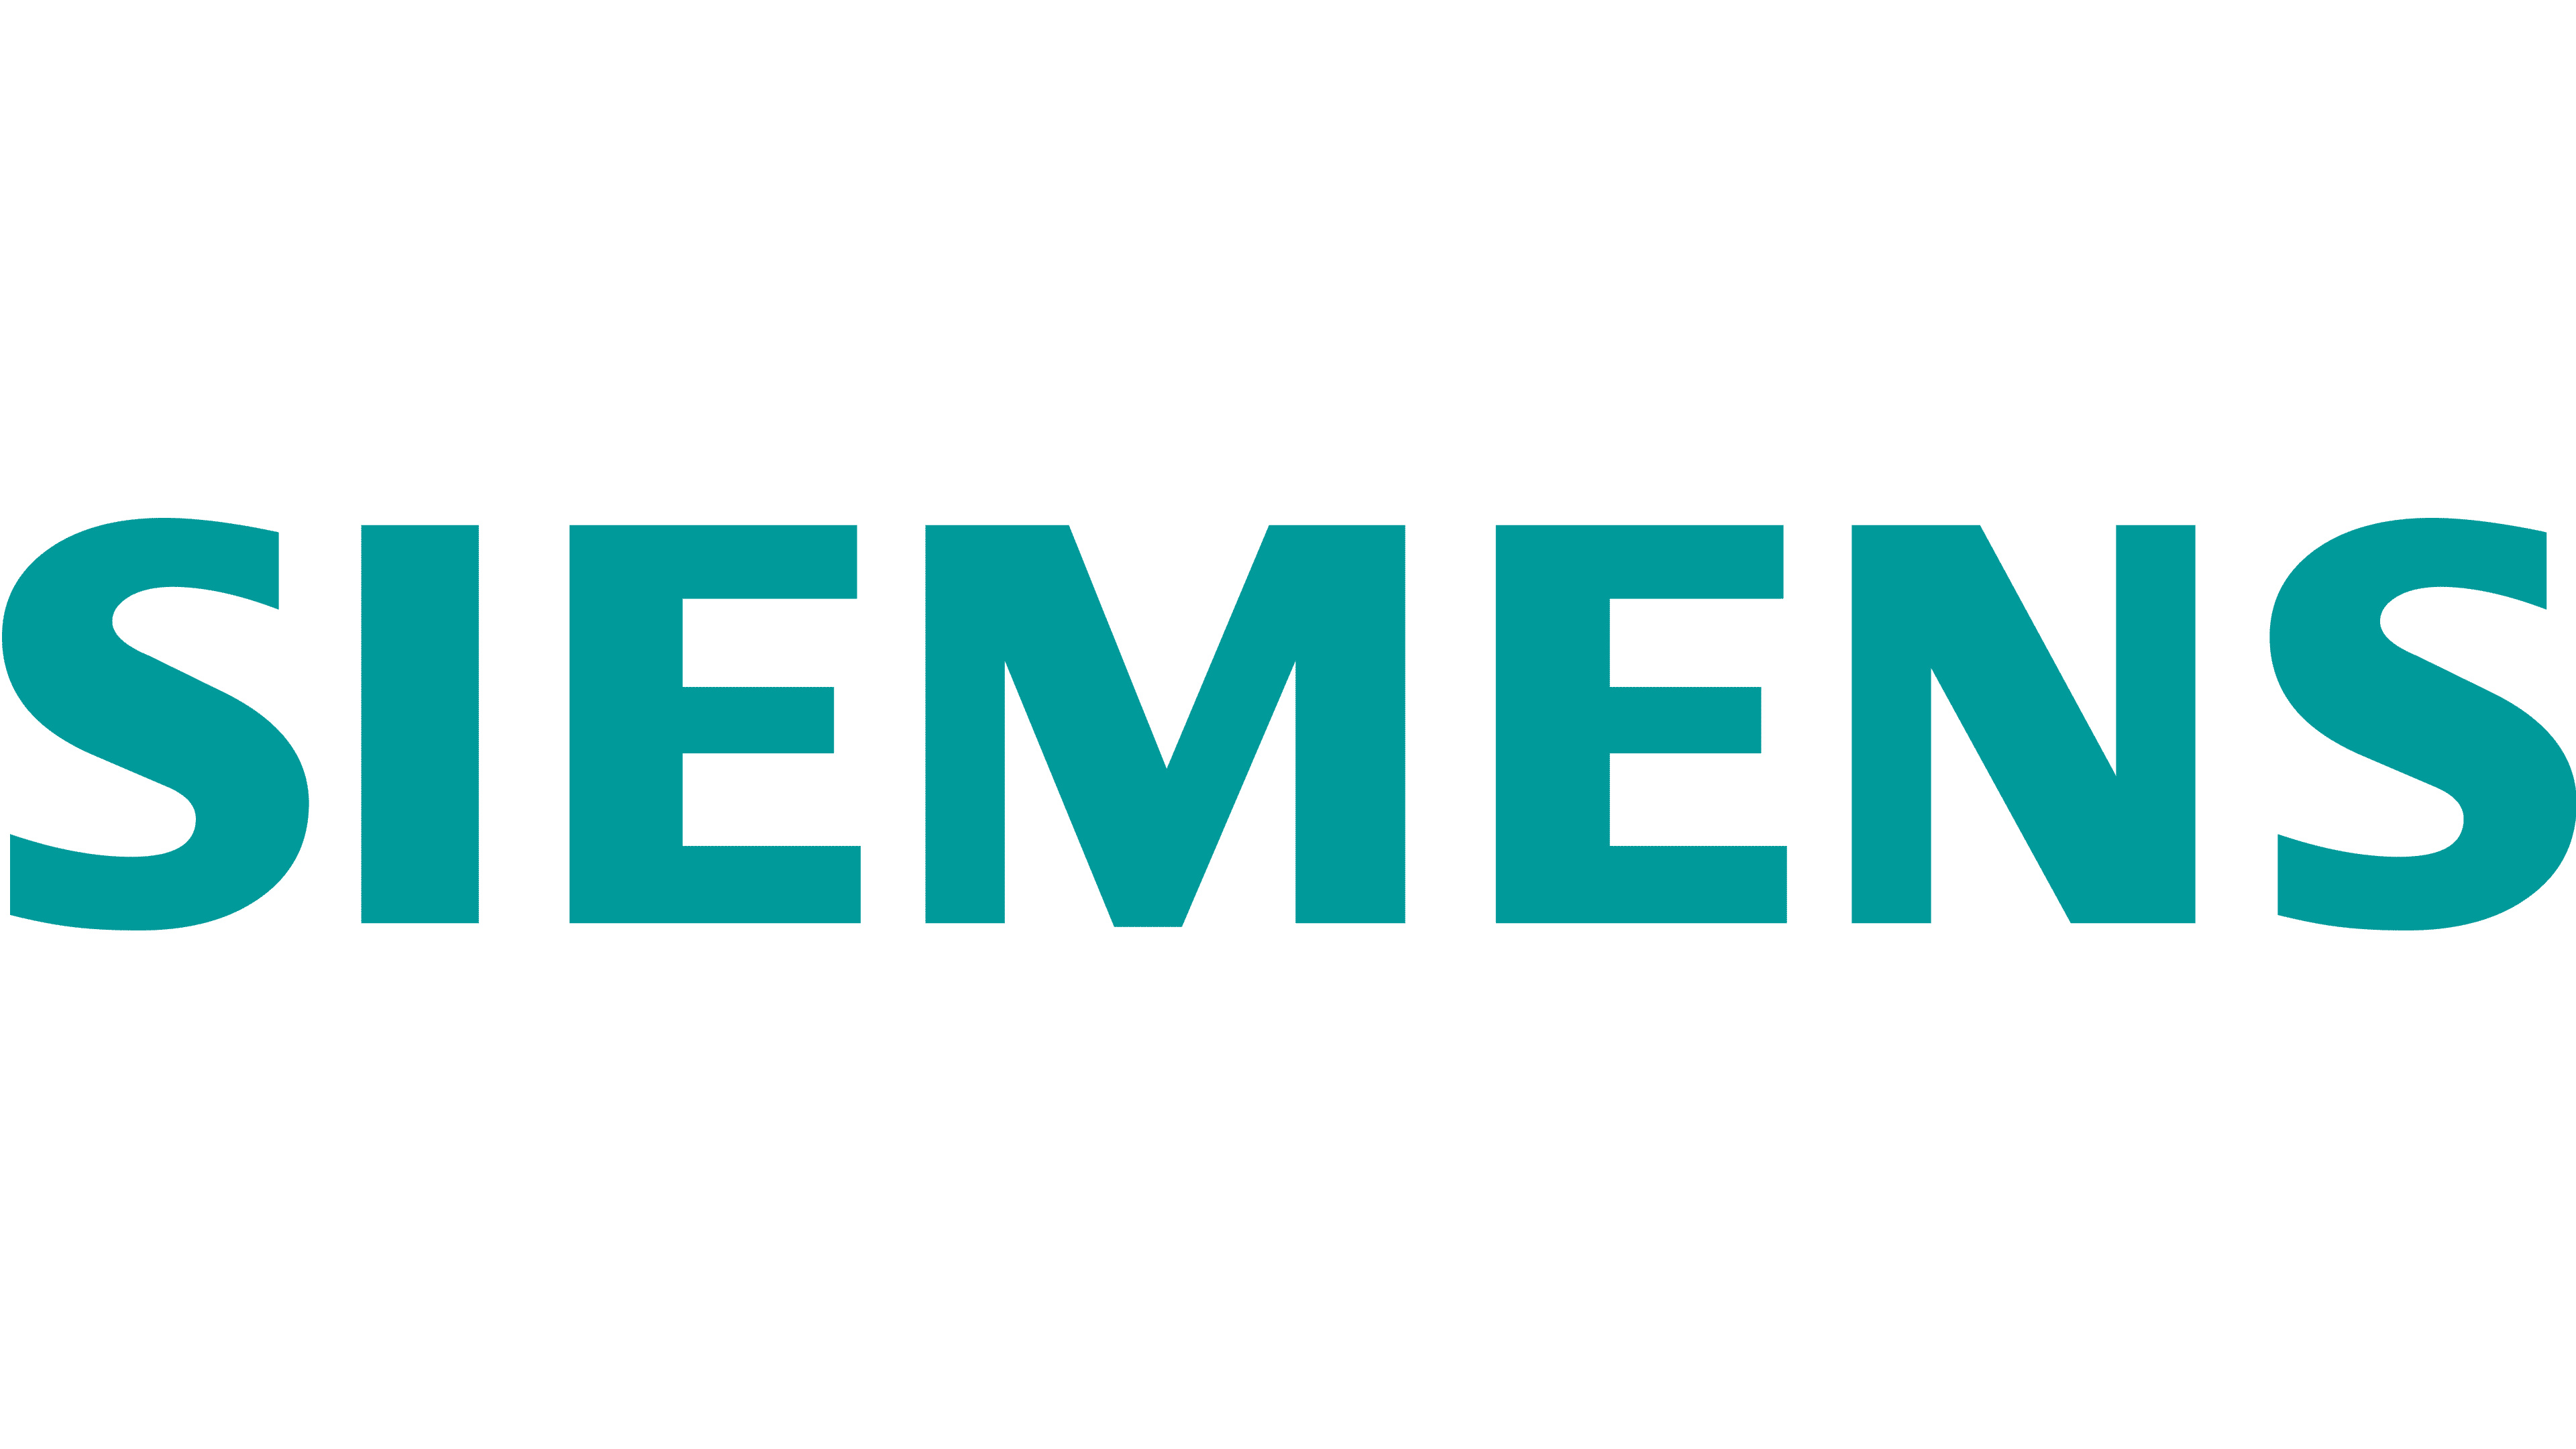 Siemens: A German multinational conglomerate corporation, The largest industrial manufacturing company in Europe. 3840x2160 4K Background.